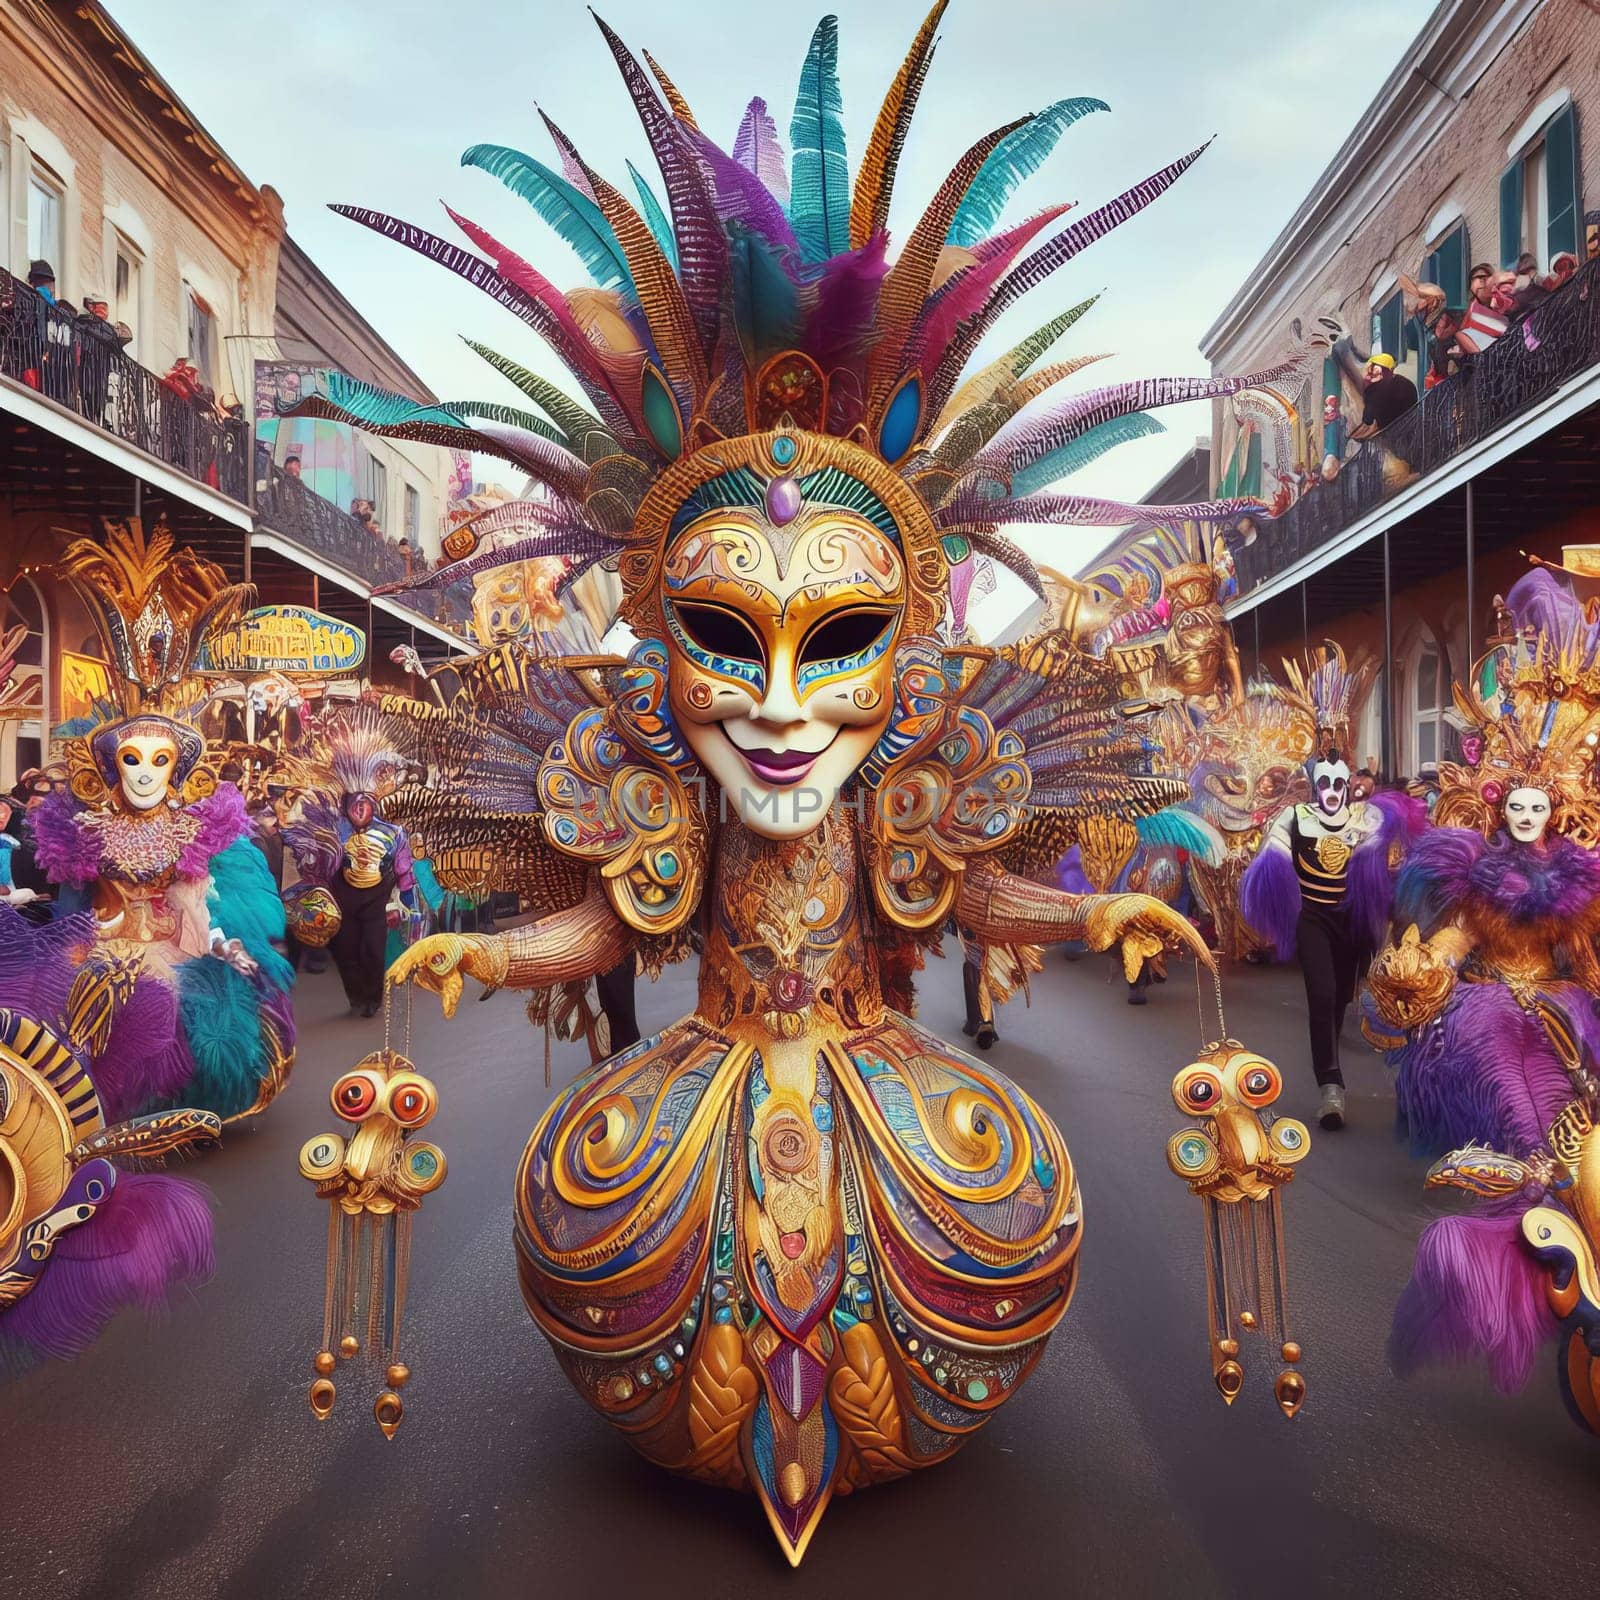 Vibrant Mardi Gras parade with participants in colorful, elaborate costumes, celebrating on a bustling street